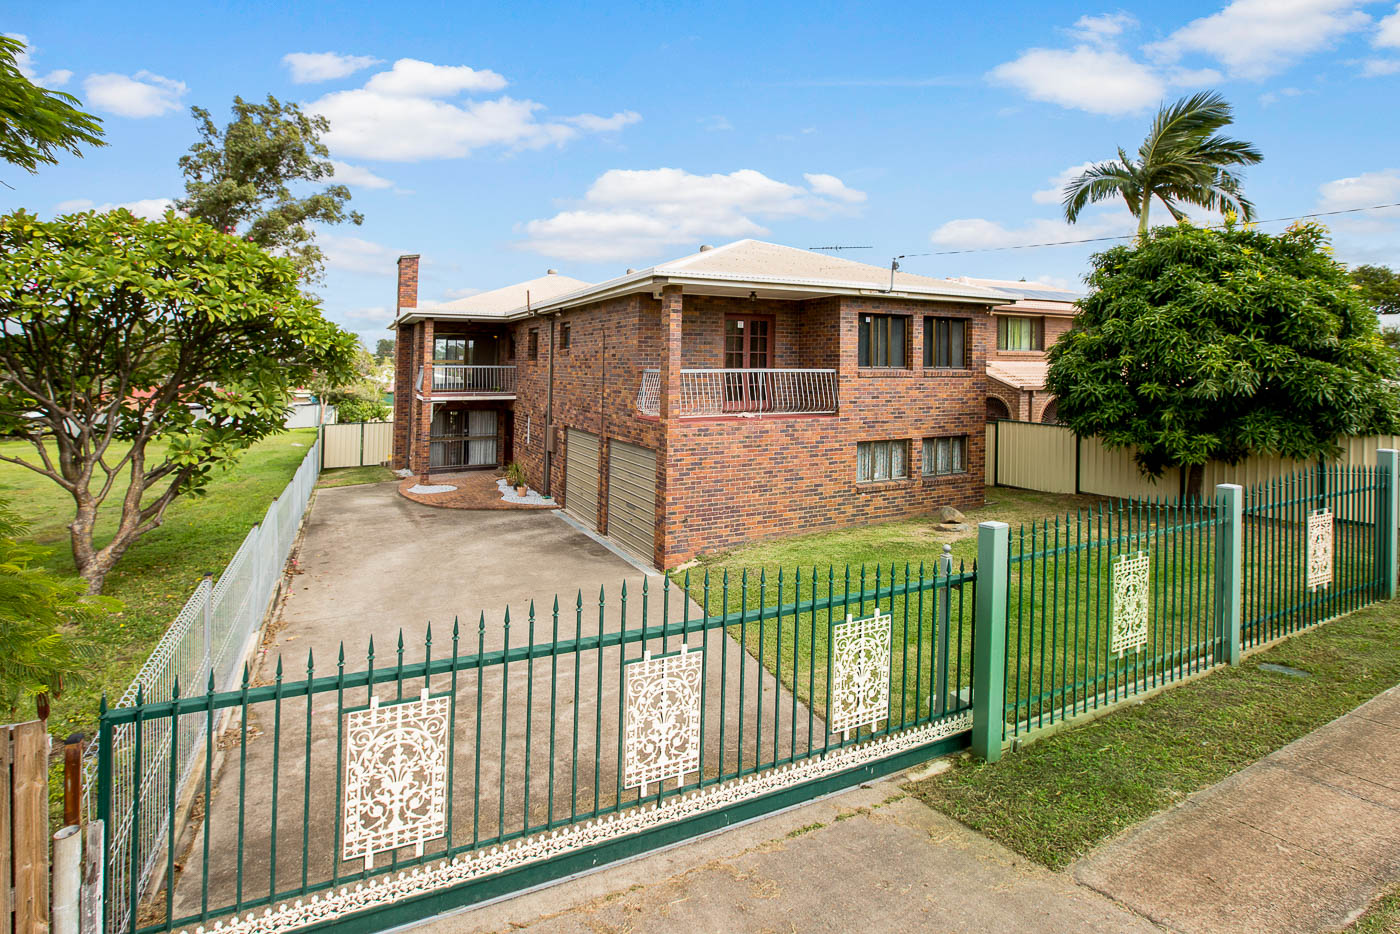 They don’t build them like this anymore – double cavity brick house with loads of space!